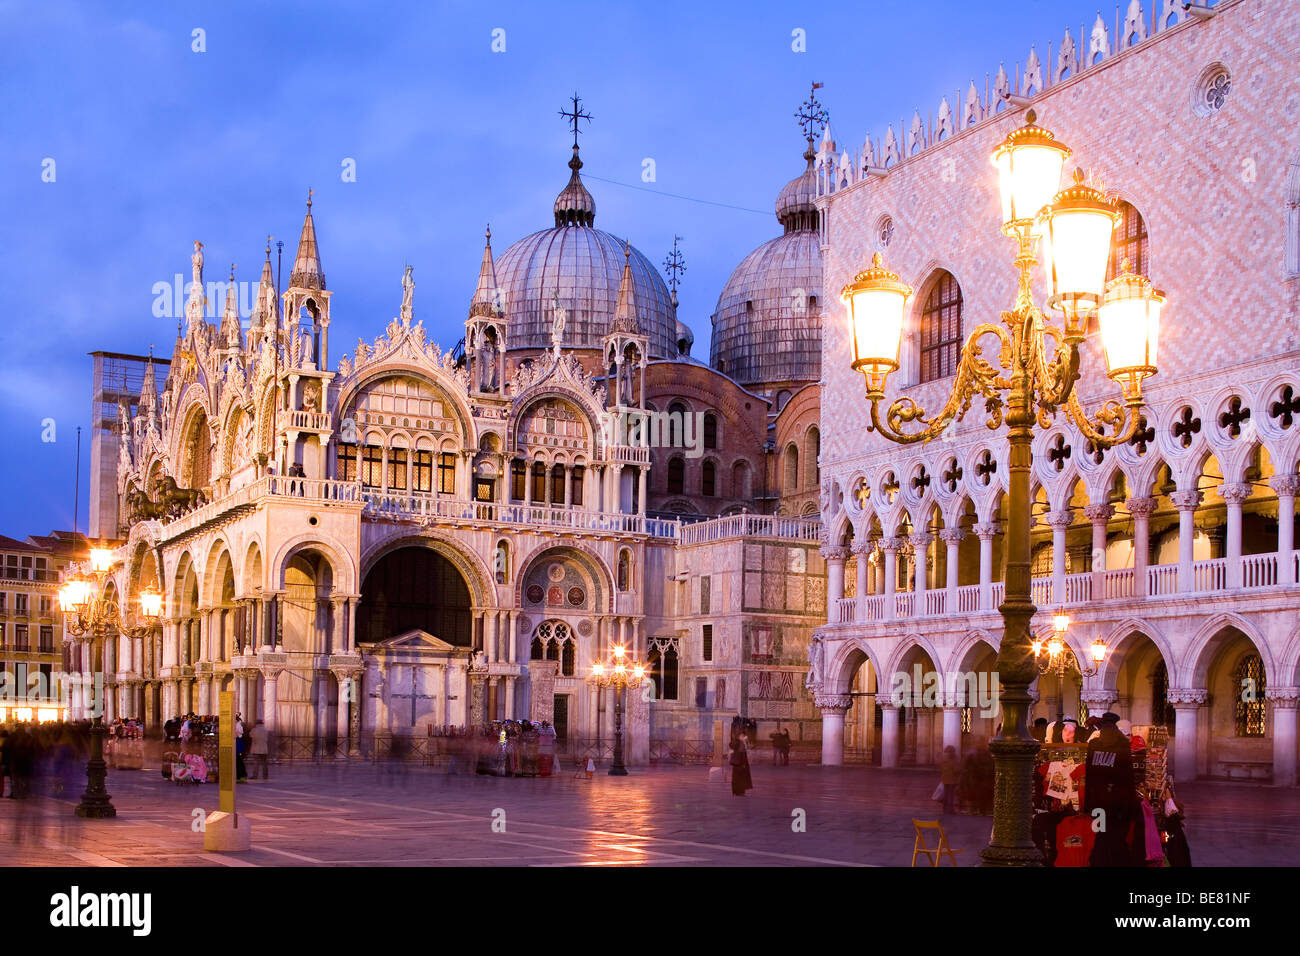 St Mark's Square, Piazza San Marco, with Basilica San Marco and Doges Palace, Palazzo Ducale, Venice, Italy, Europe Stock Photo